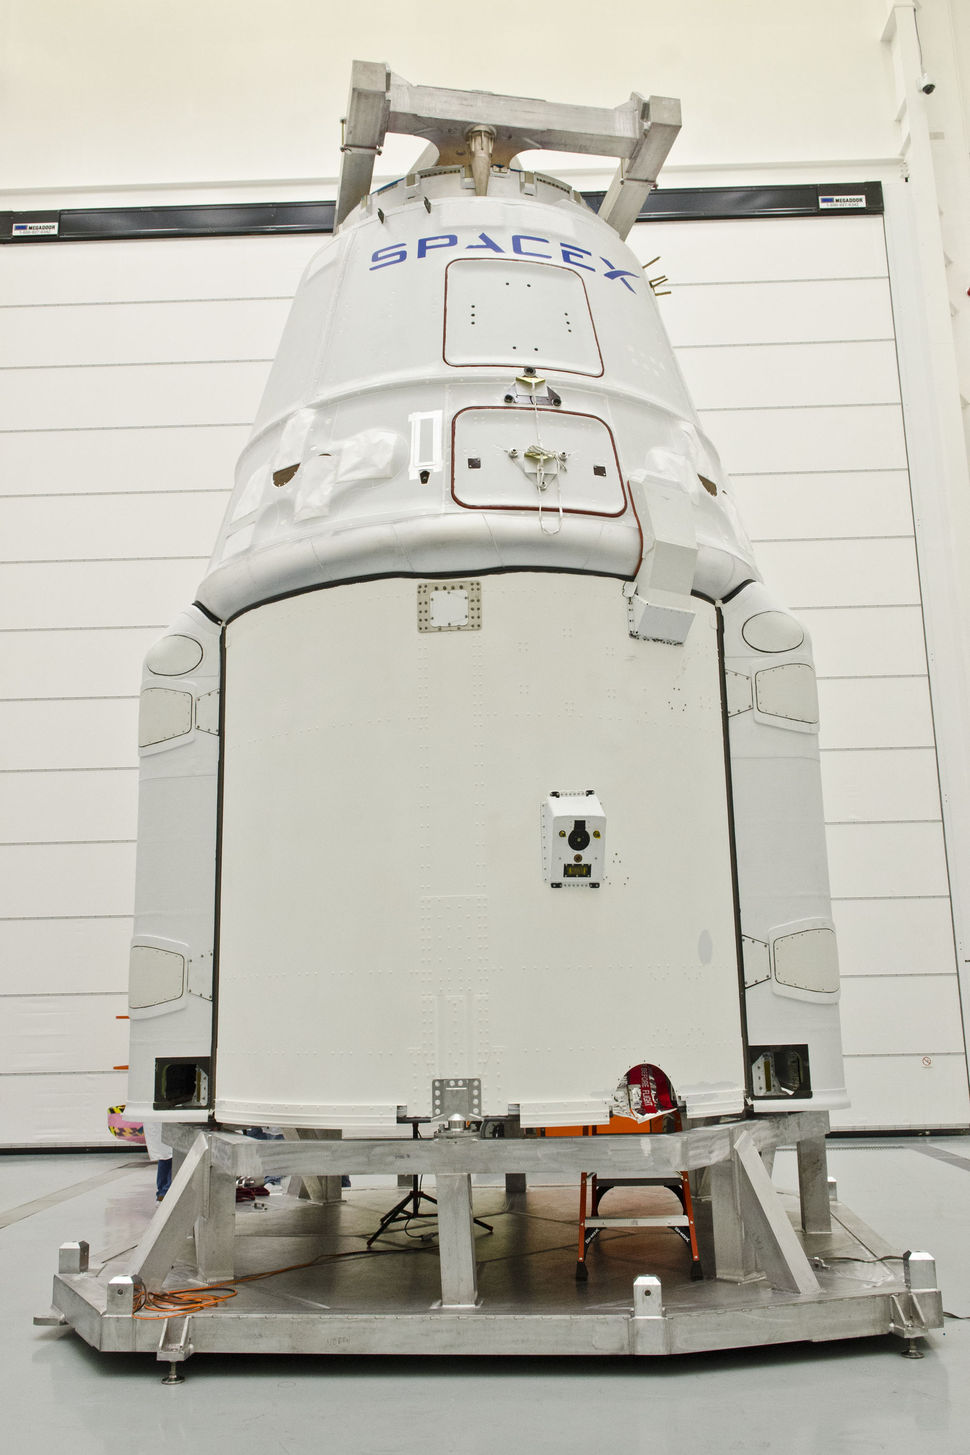 Dragon in SpaceX's hangar, prior to vehicle mate.